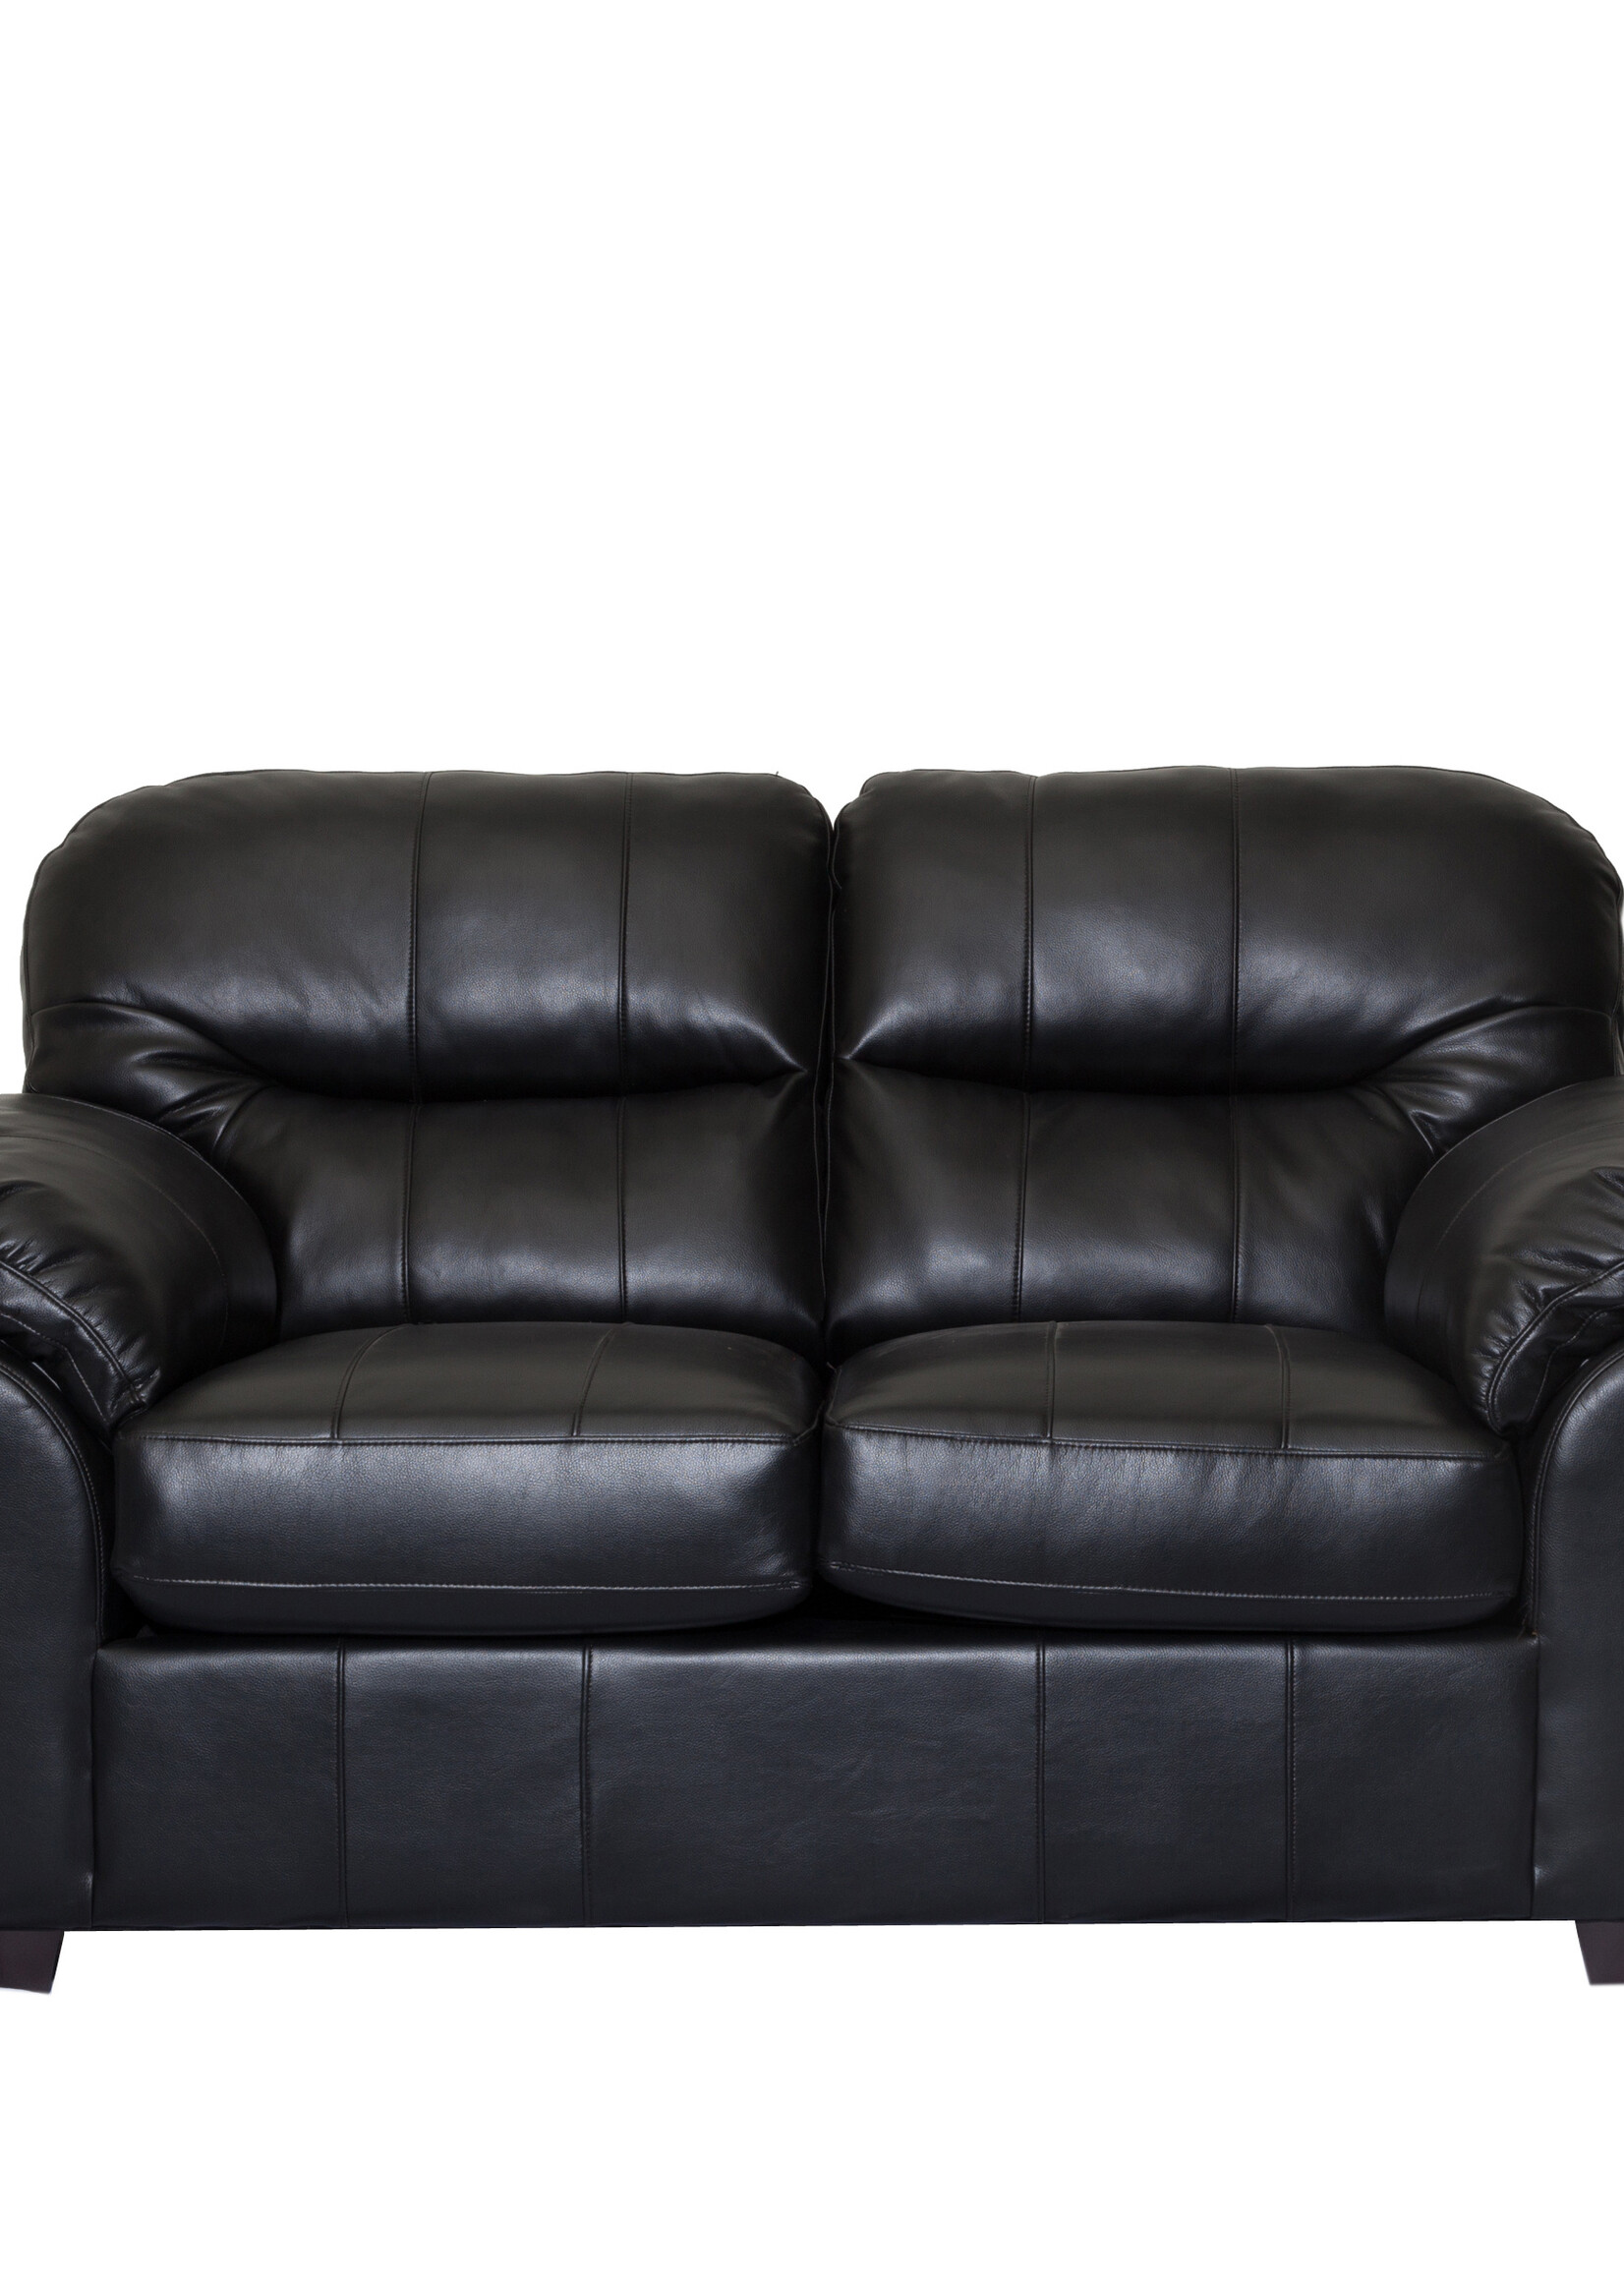 Monaco Collection - Black Leatheraire Loveseat 66X37X40 - Canadian Made